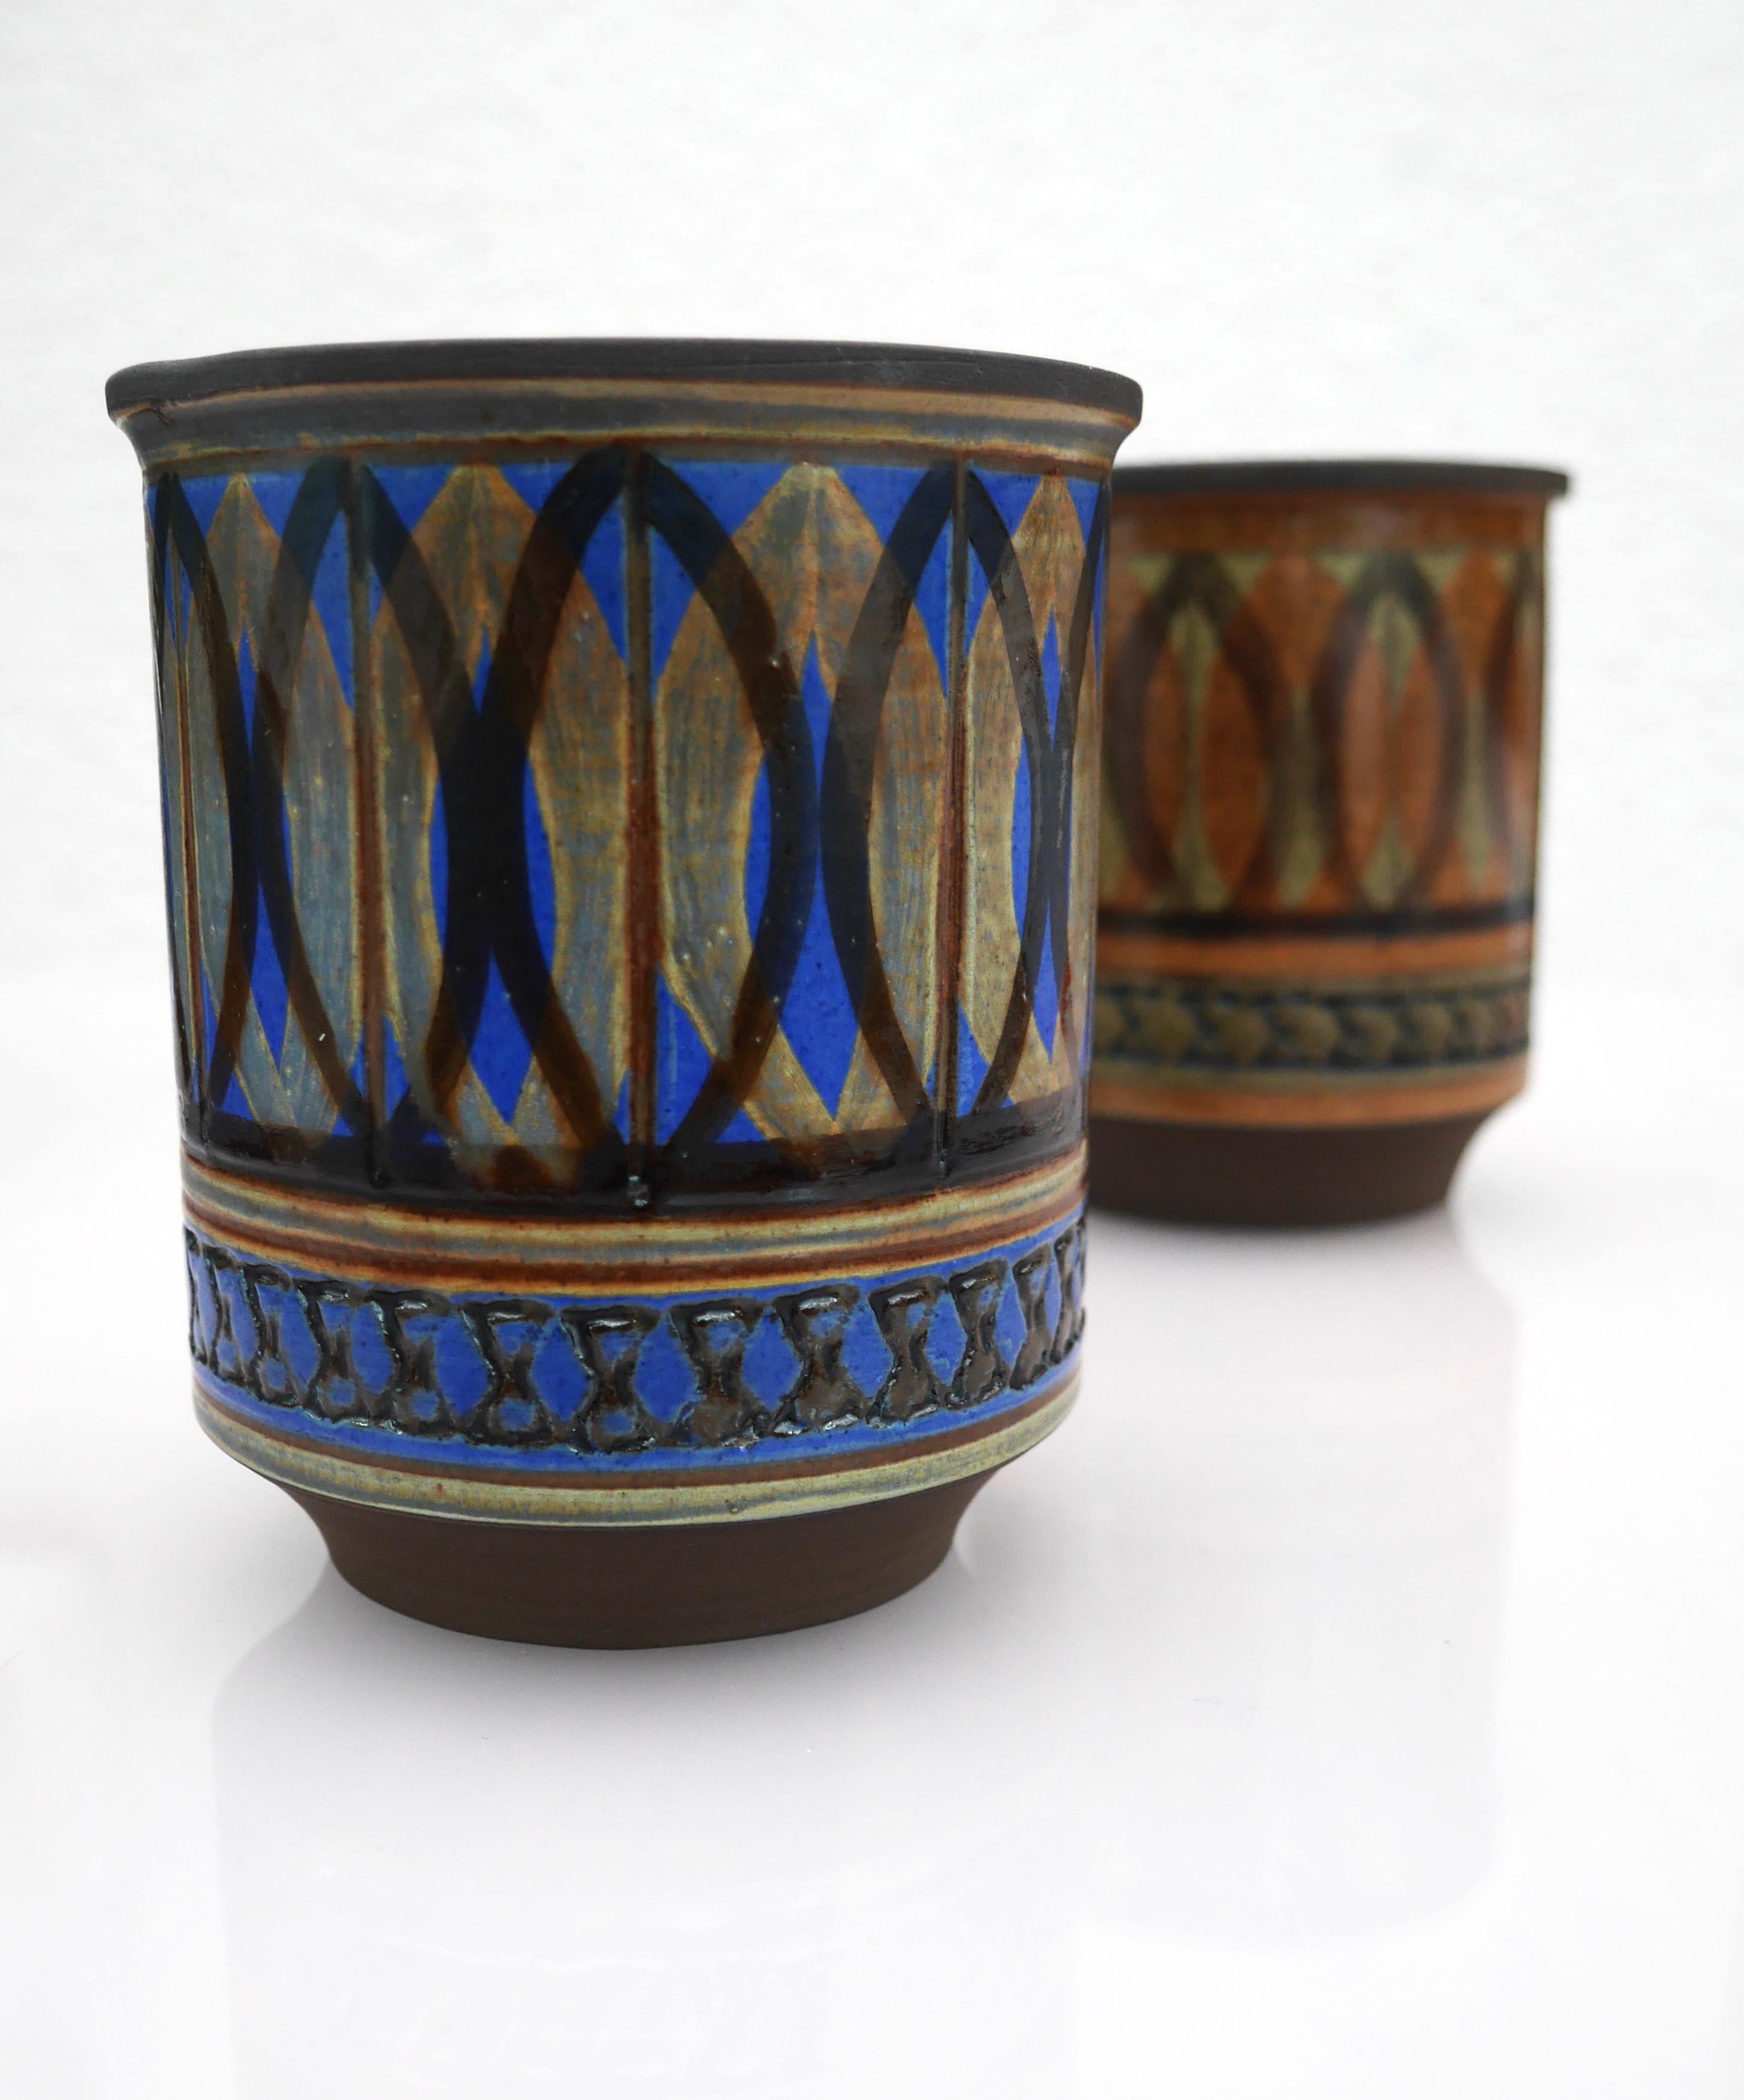 Mid-20th Century Vases or flowerpots from Alingsås, Sweden by Ulla Winblad. For Sale